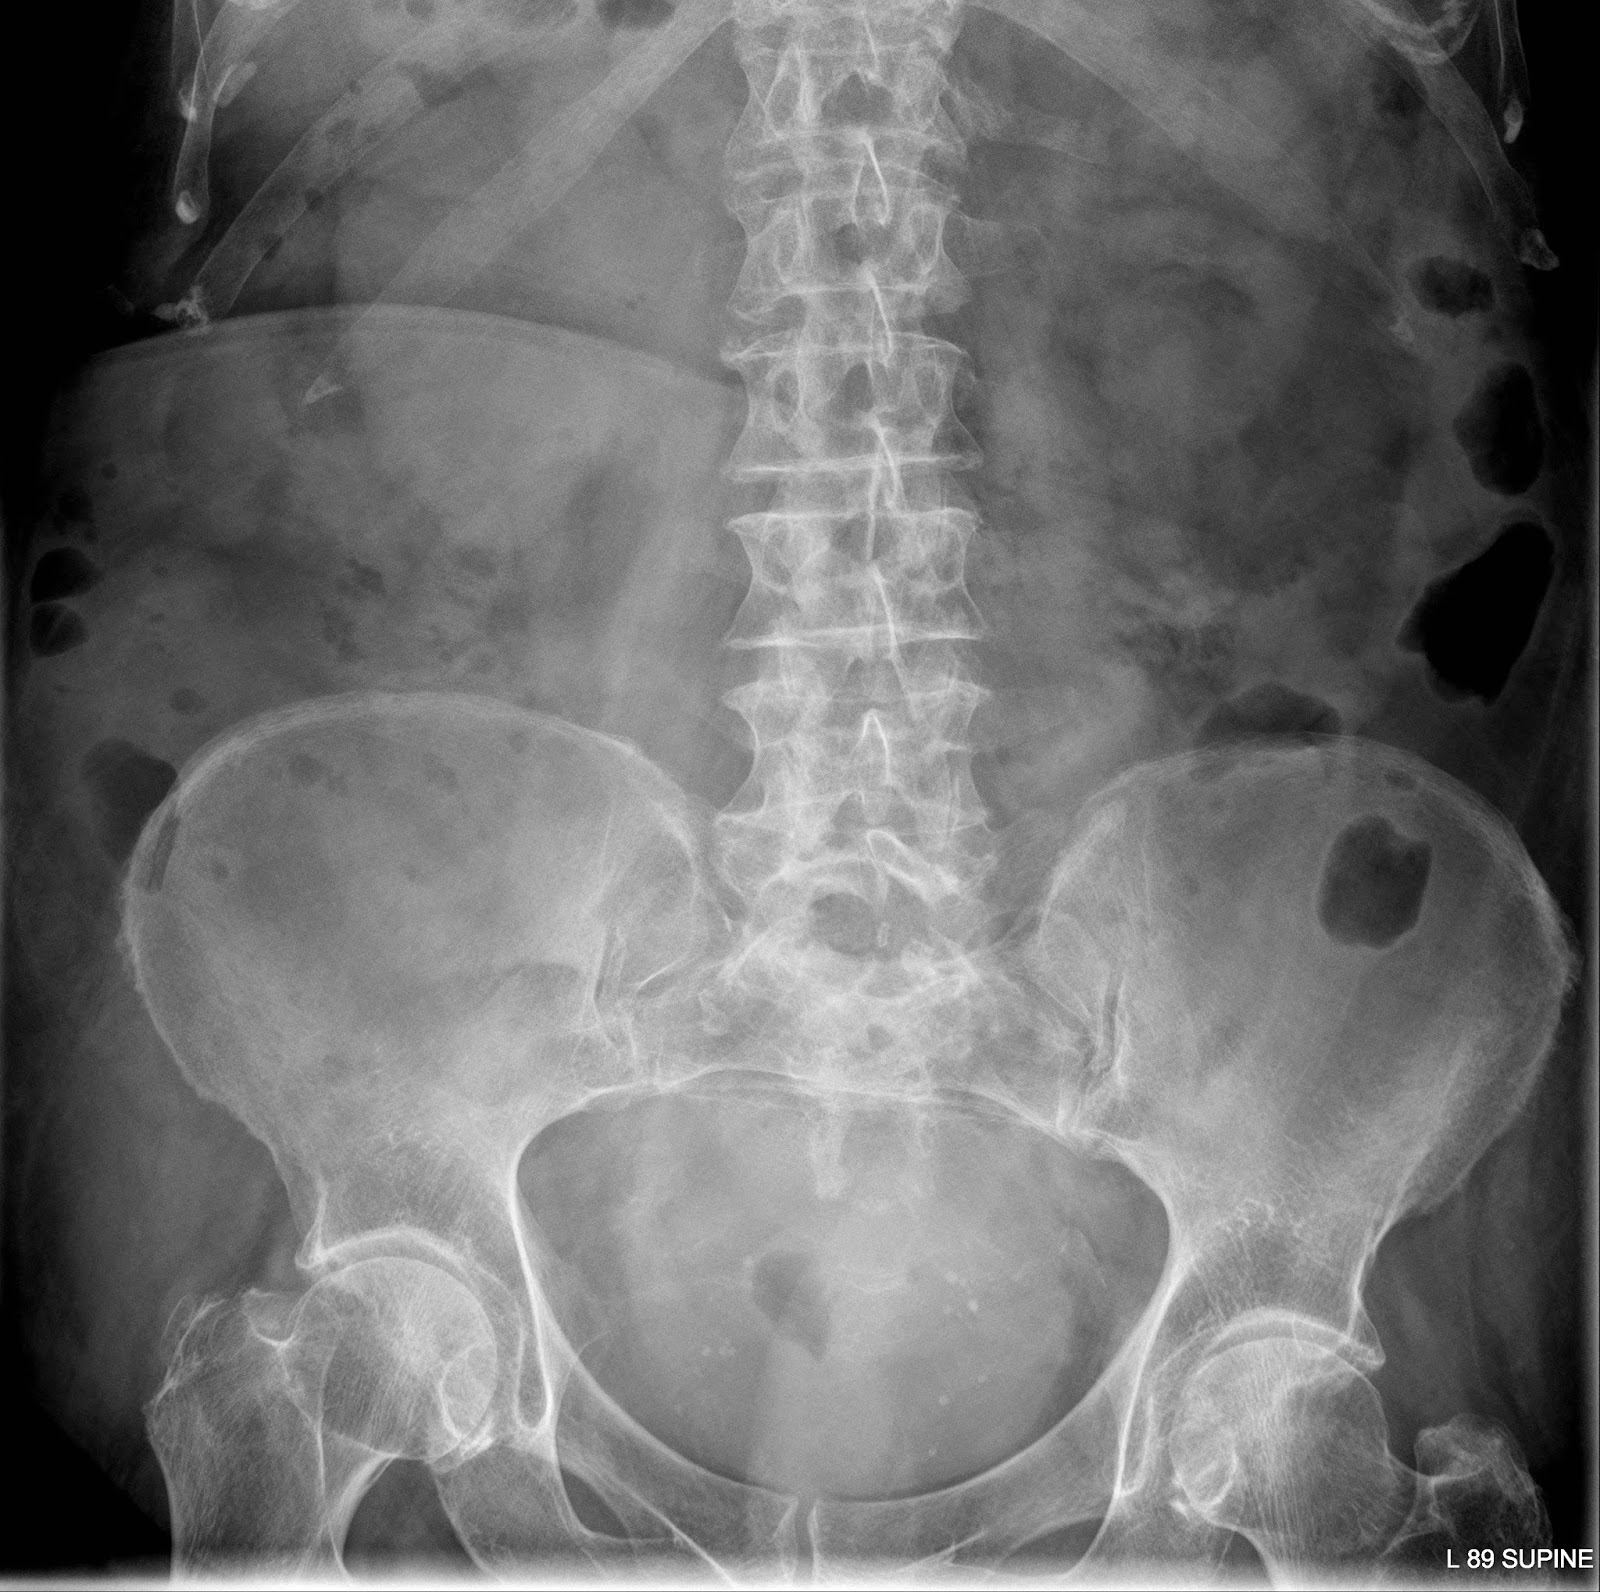 the xray doctor: xrayoftheweek 7: why is this person unwell?